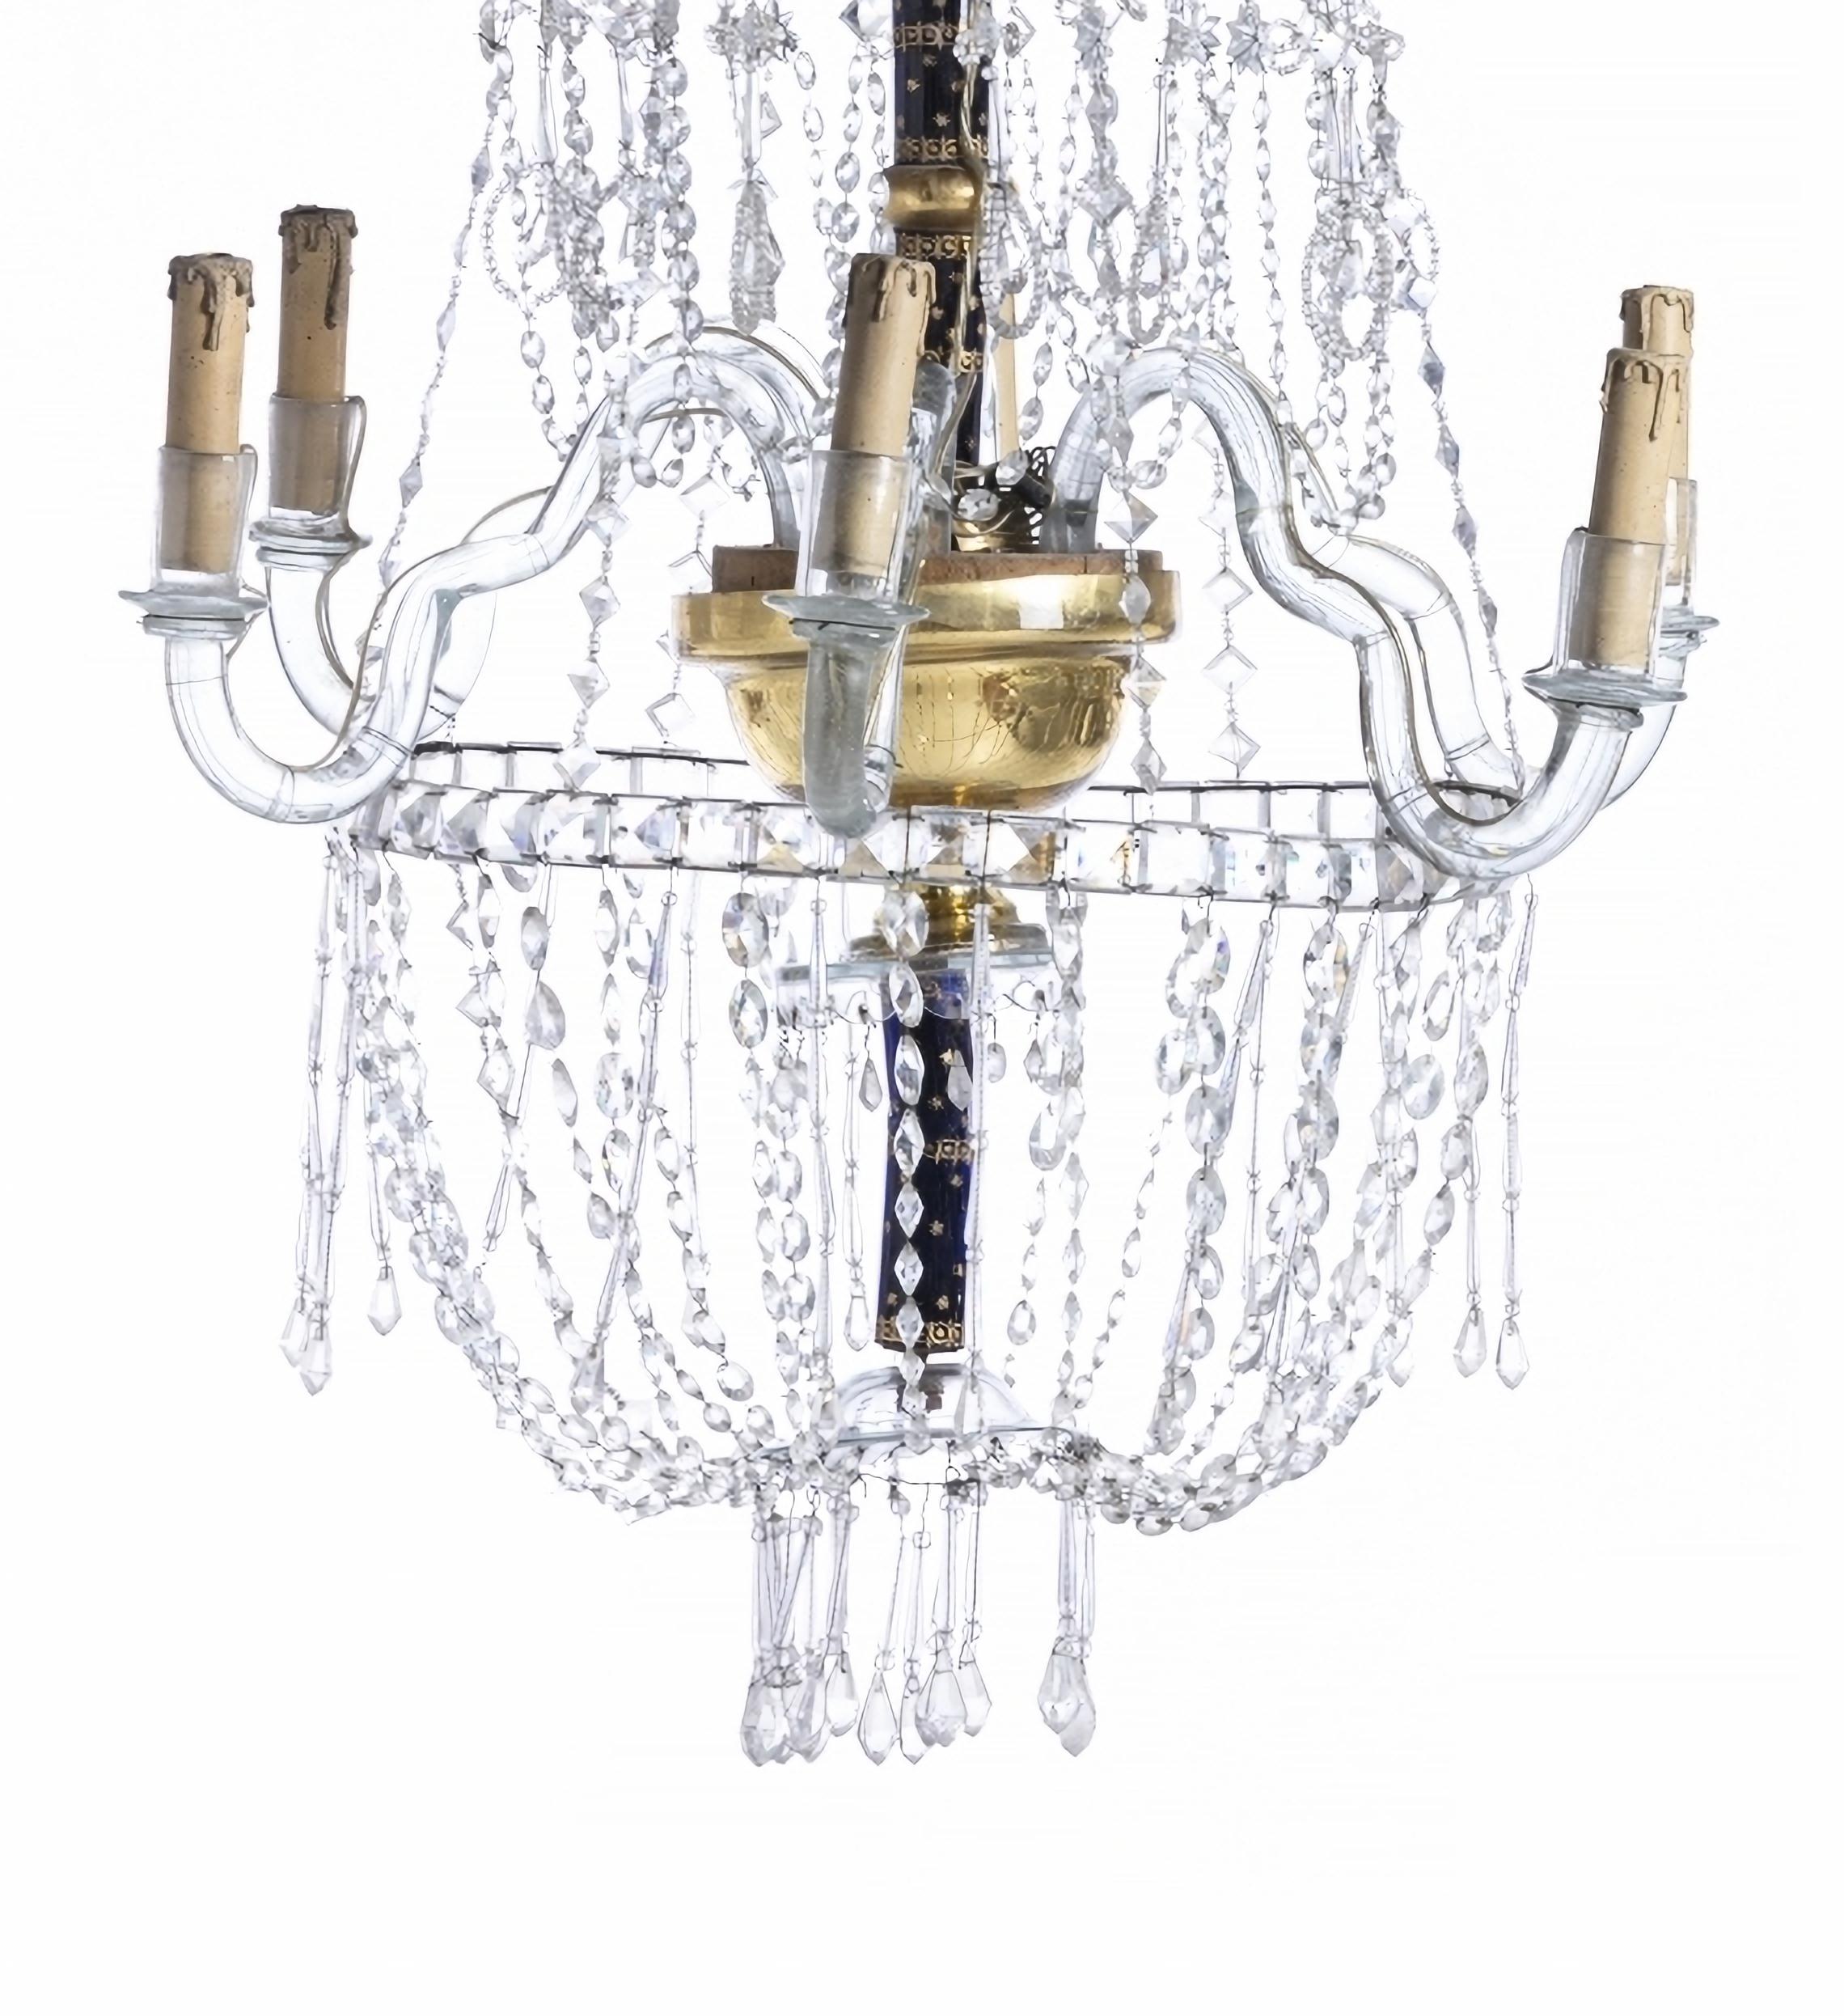 Amazing and rare pair of bag chandelier.
Lighting Category.
Portuguese 
from the end of the 18th century. 
in crystal with pendants. 
Structure in metal and glass painted in shades of blue and gold. 
Defects. Height: 126 cm.
Good condition.